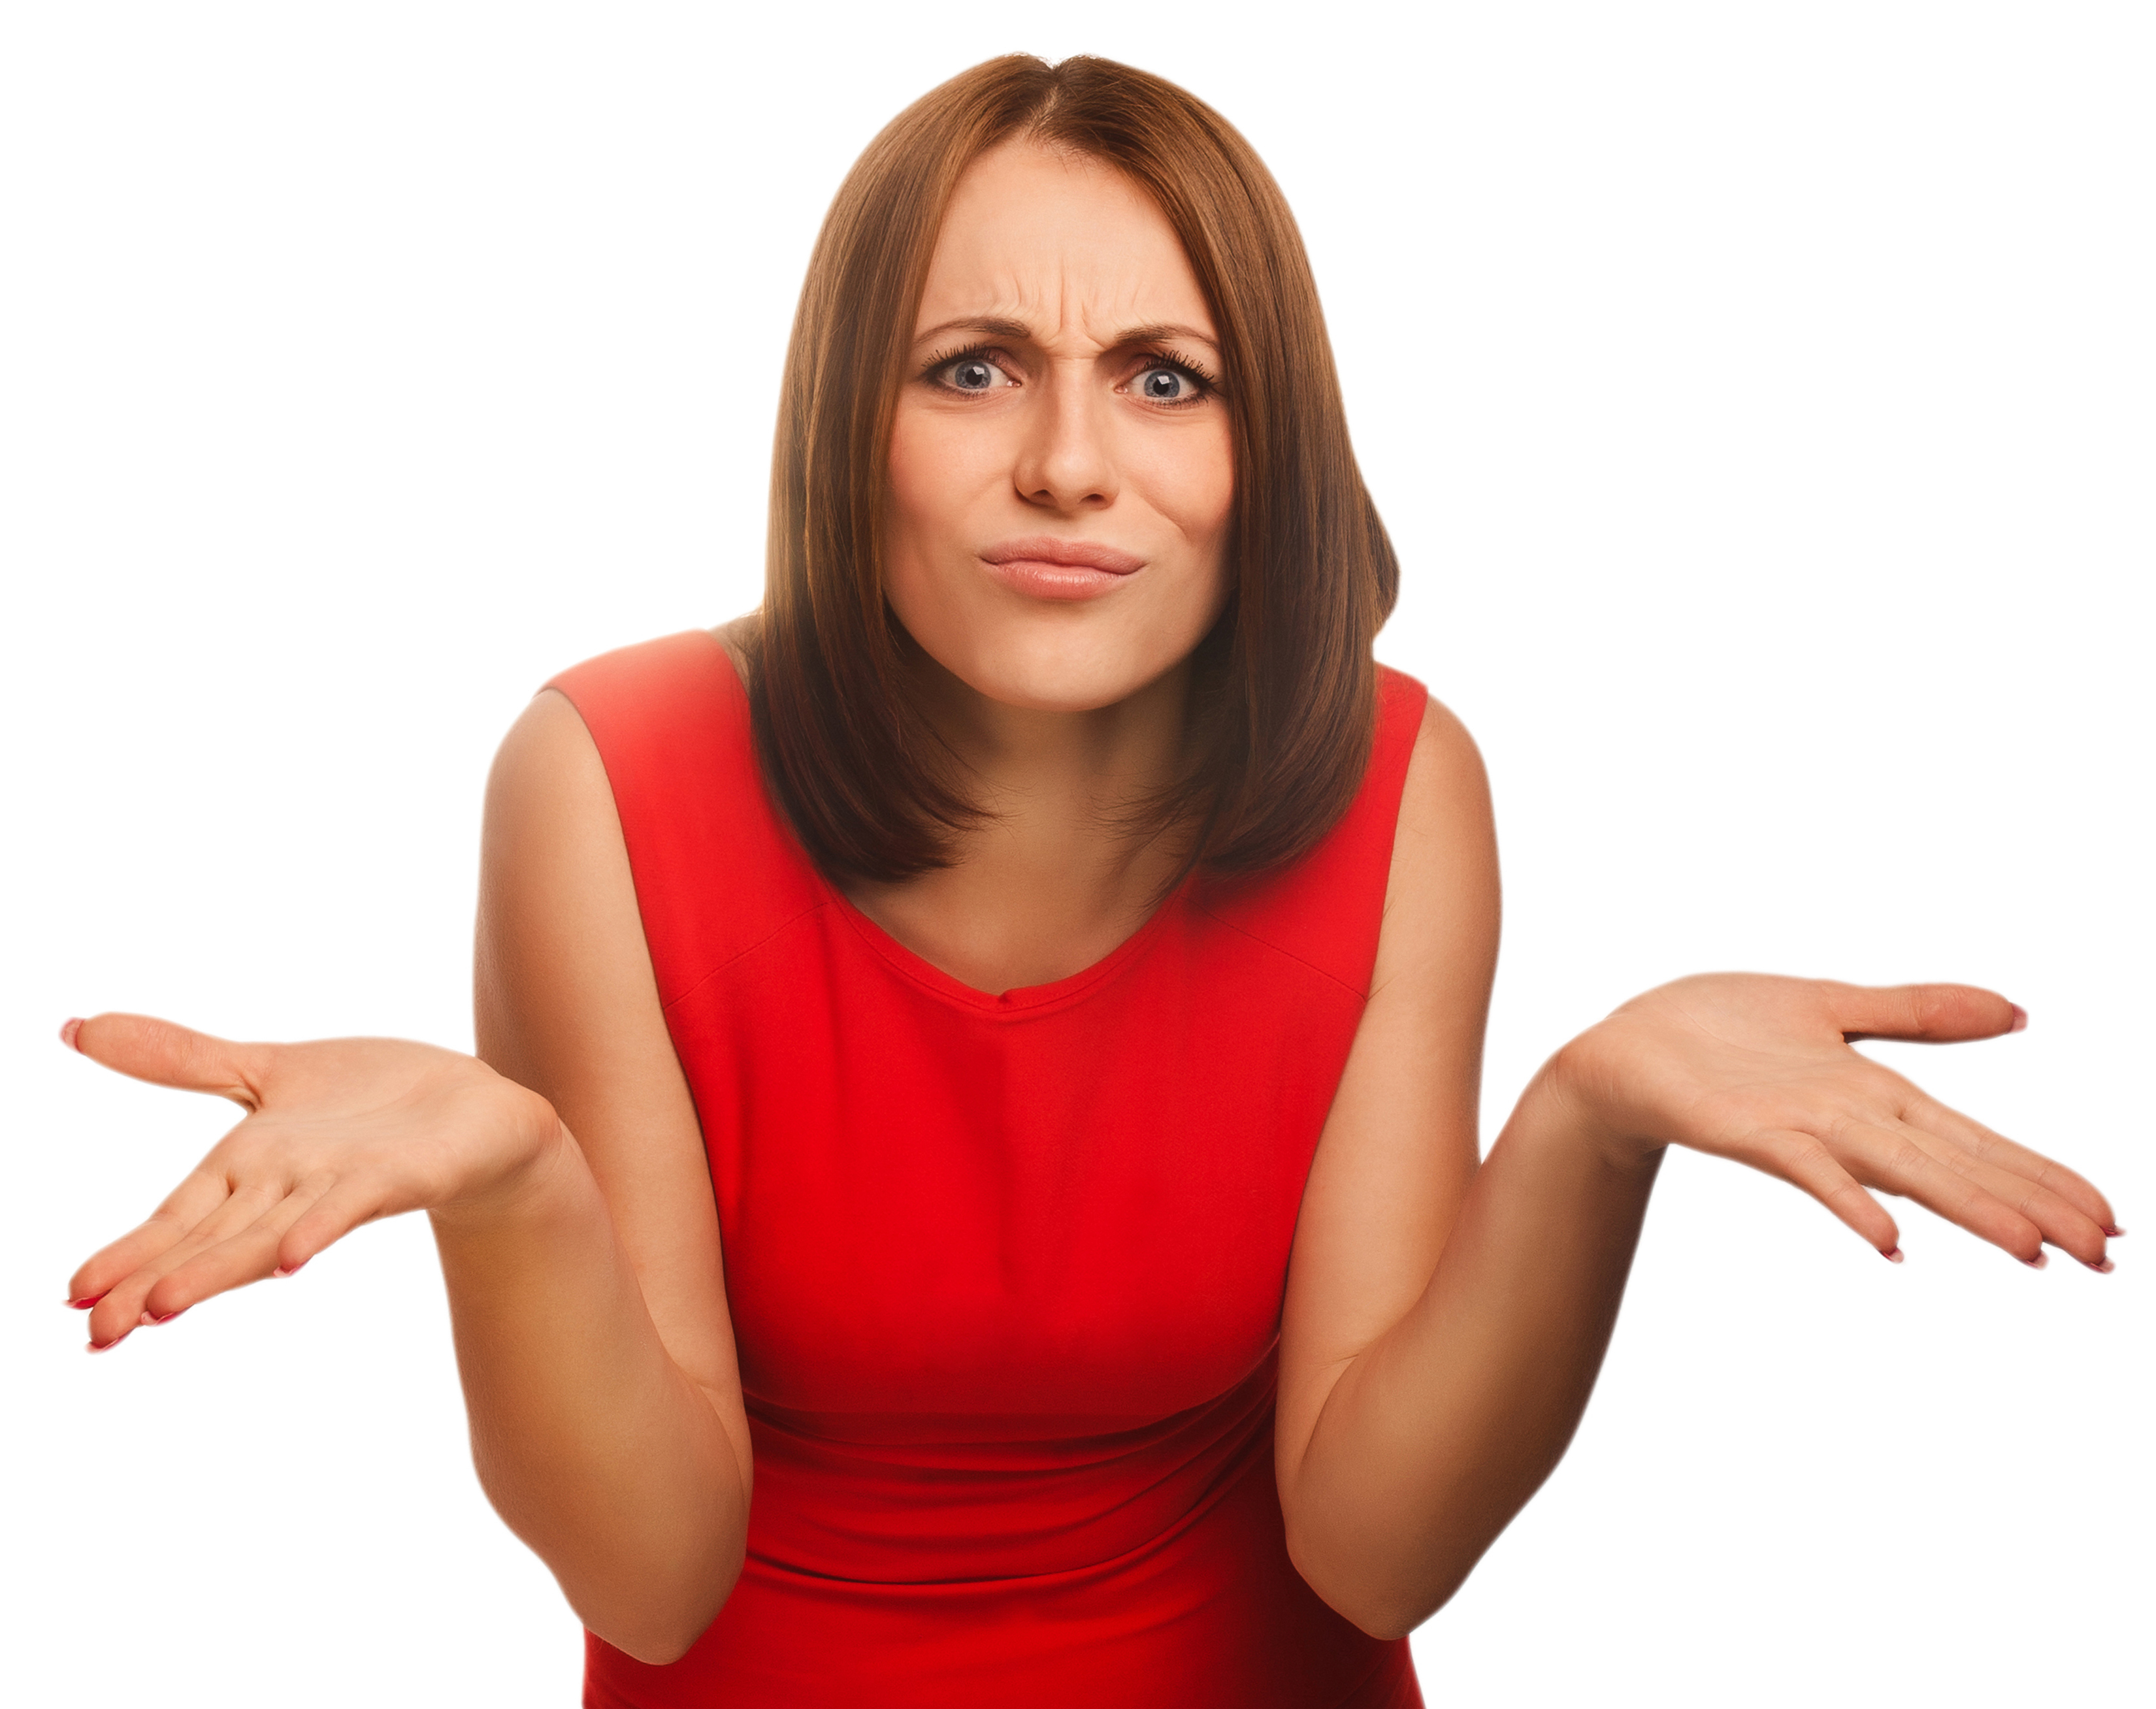 A woman in red with her palms up in exasperation | Source: Shutterstock